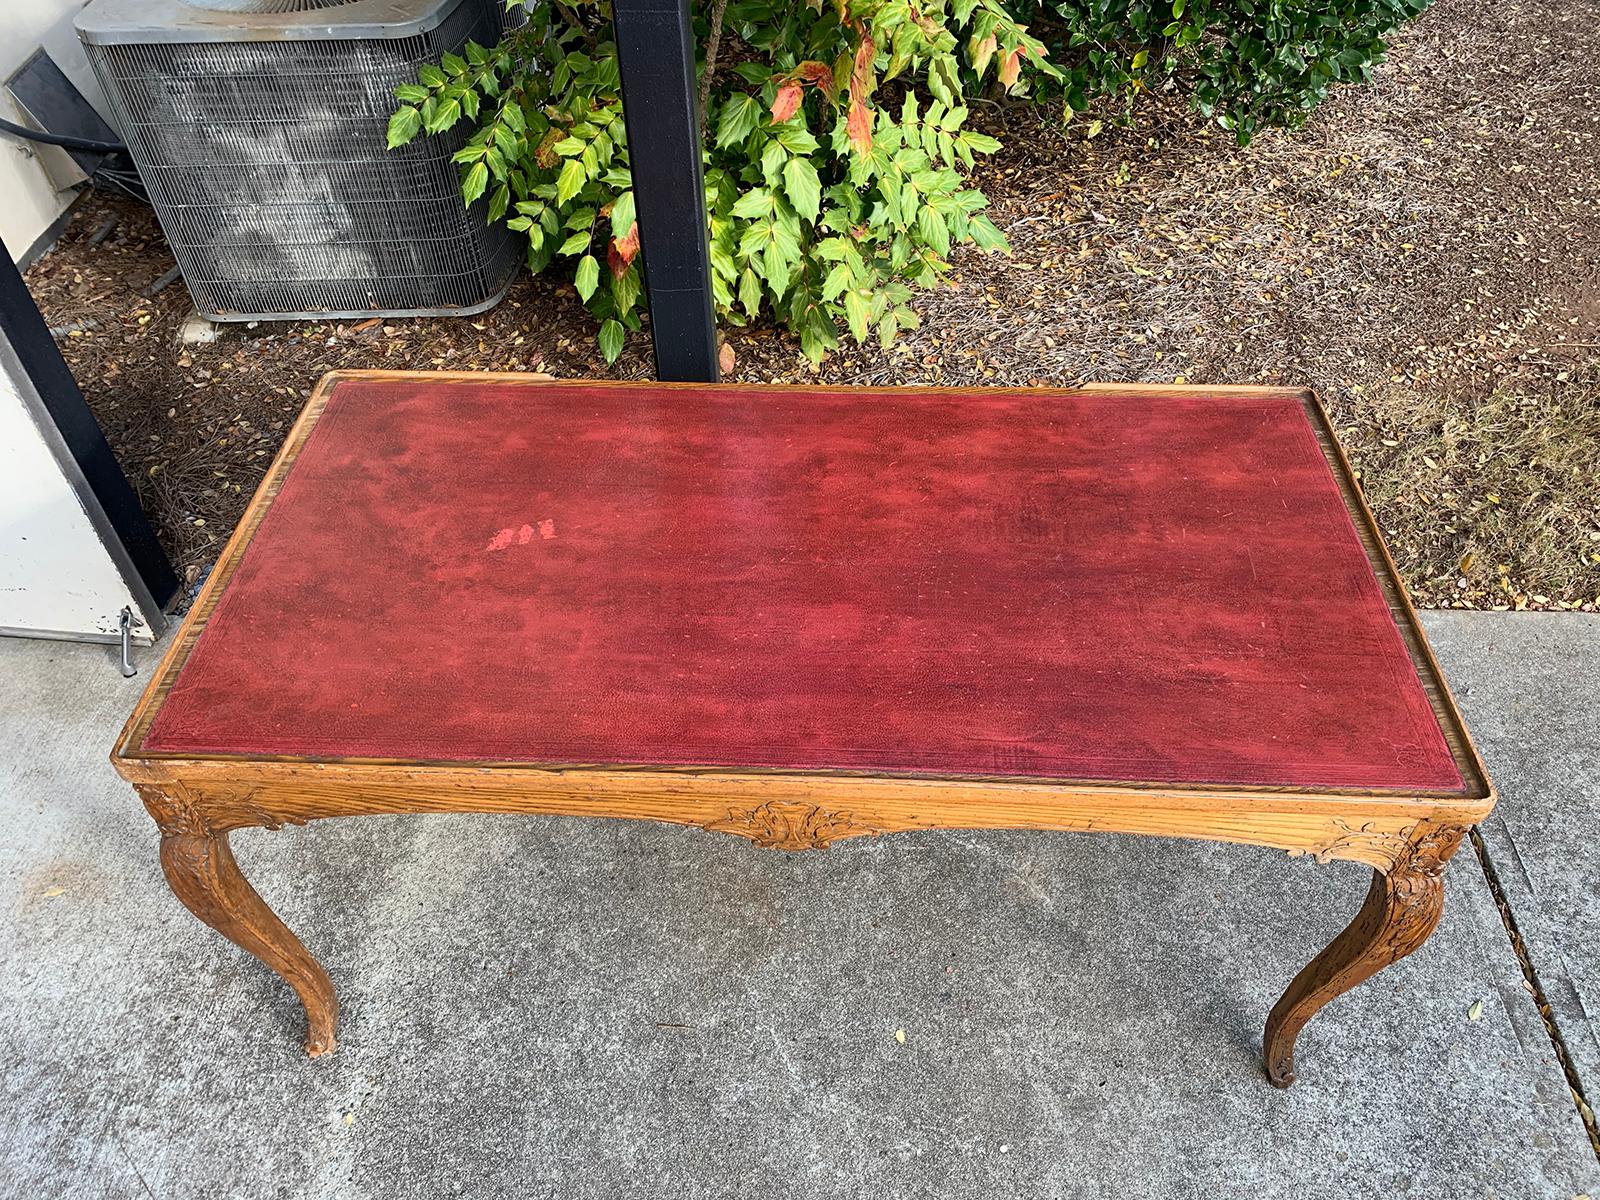 18th-19th century French Louis XV style carved tric-trac table with red leather top.